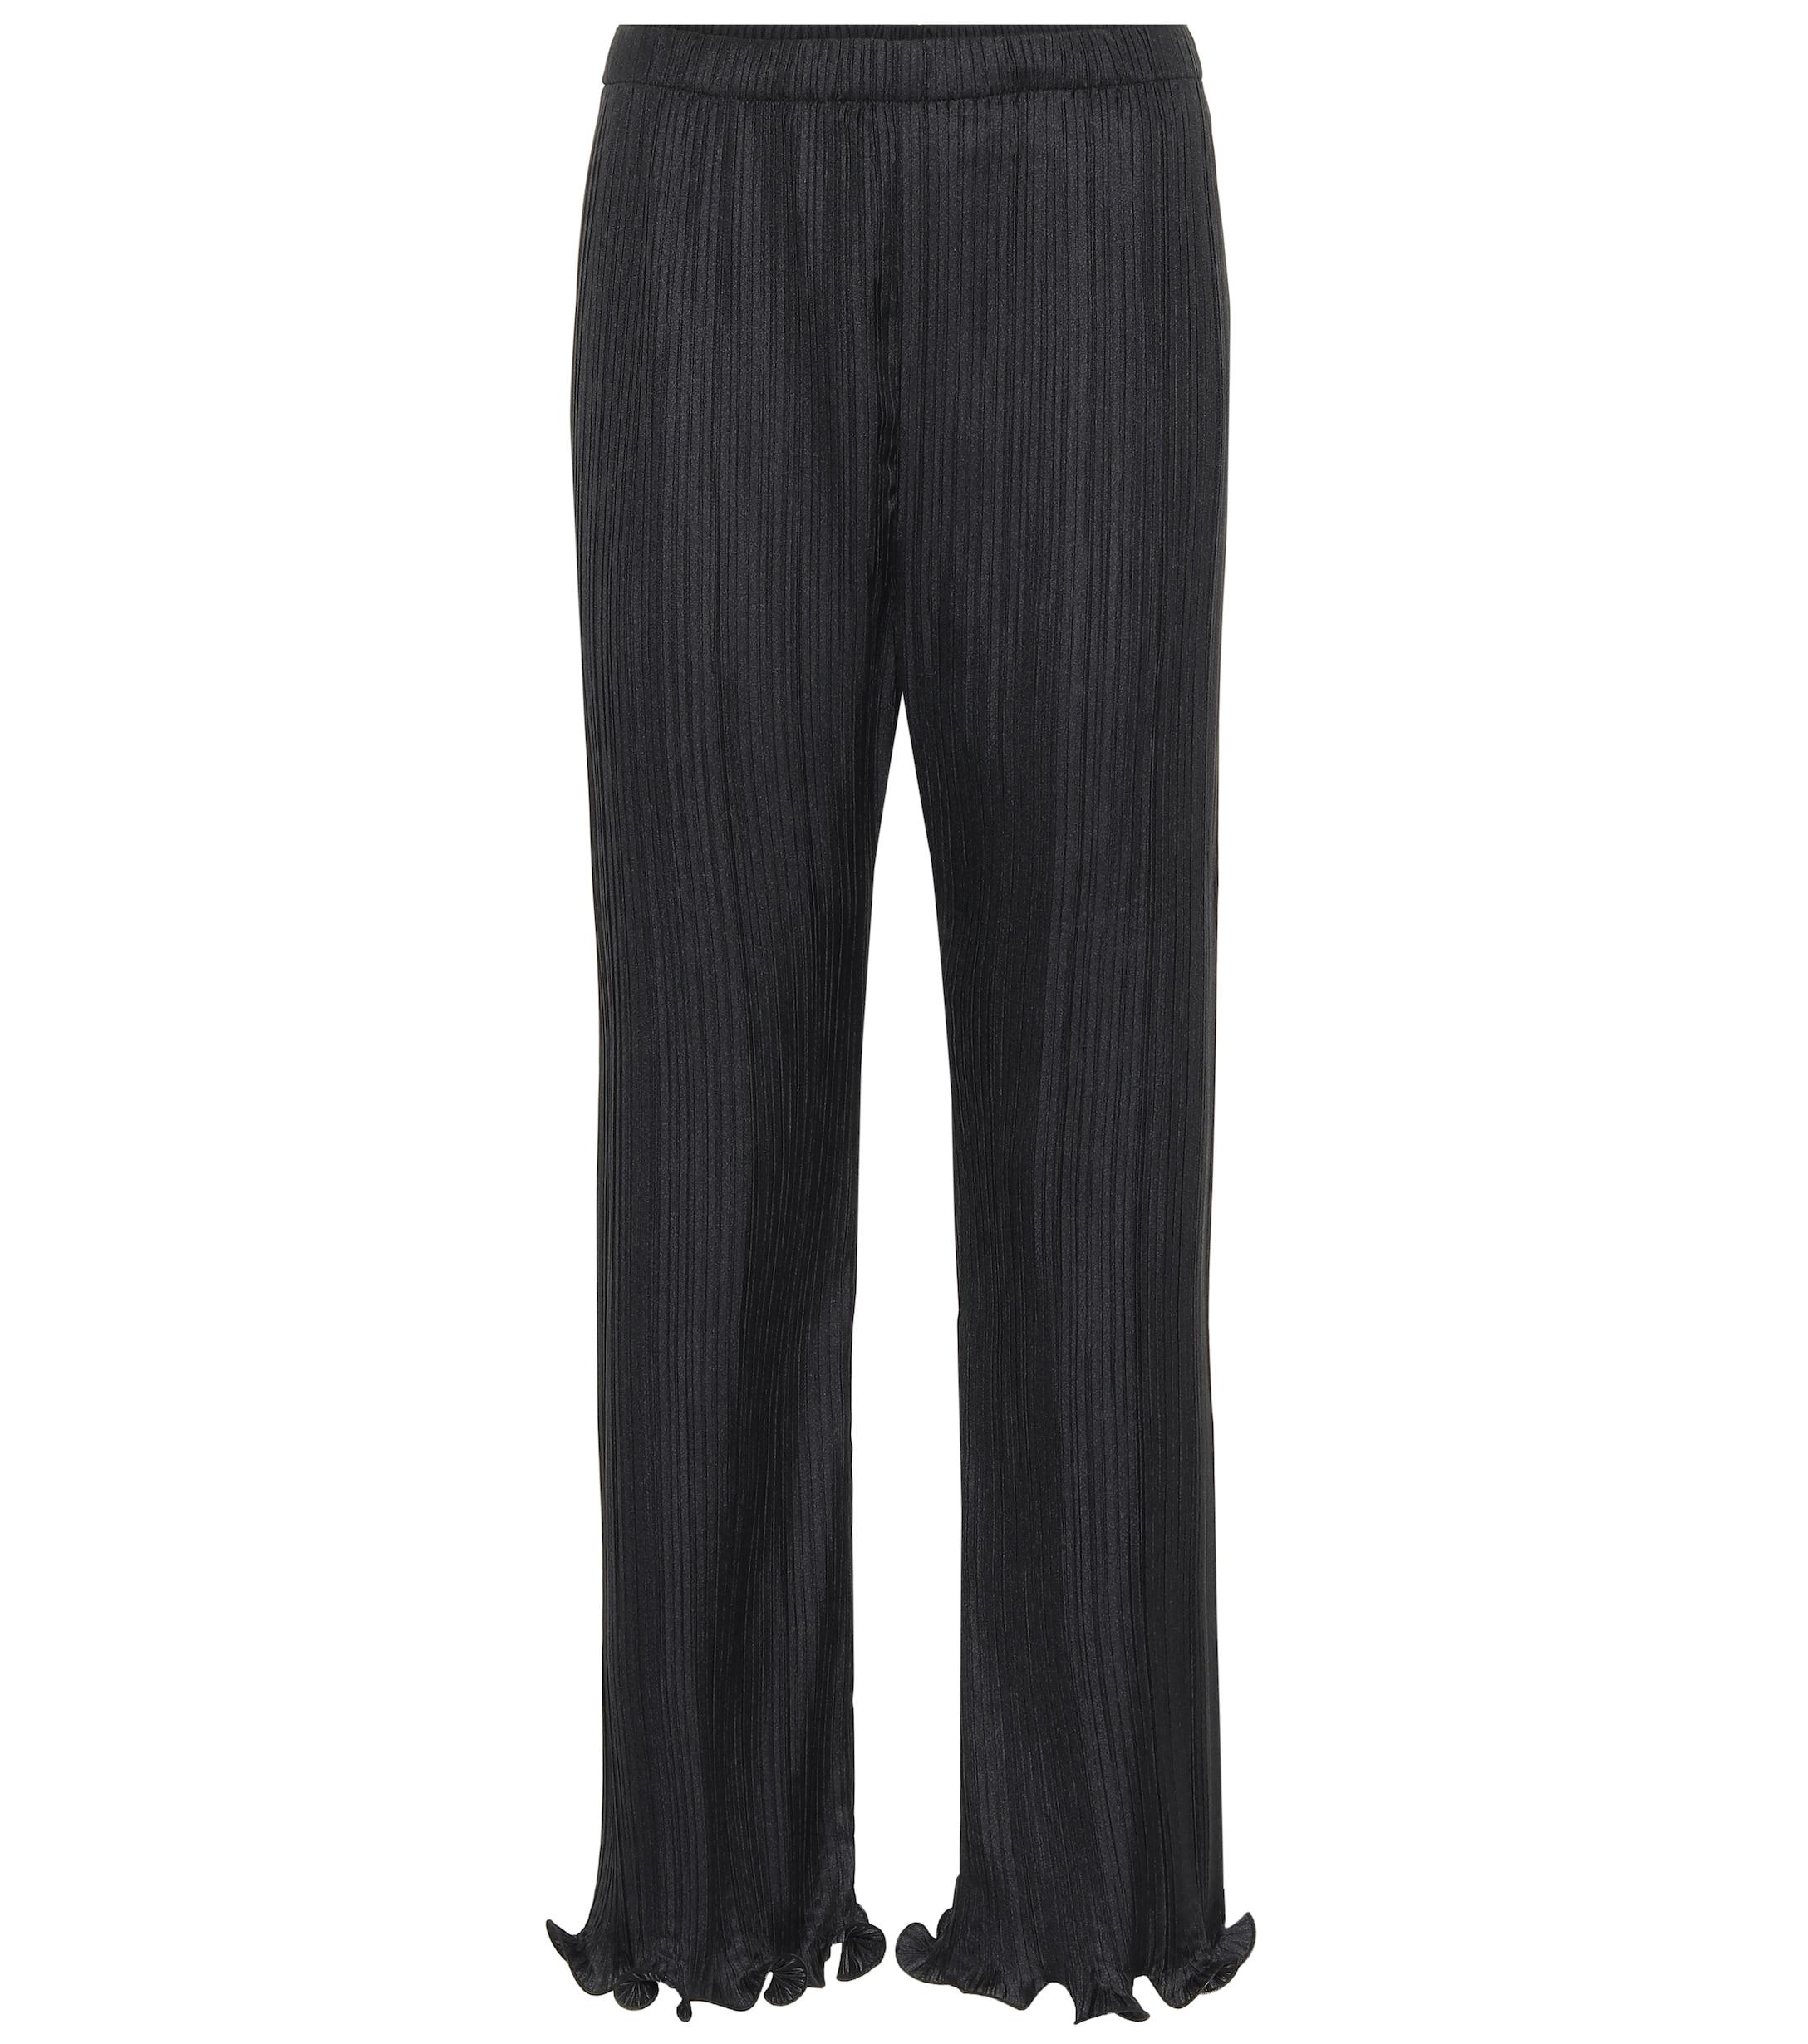 Givenchy Pleated Satin Pants in Black - Save 14% - Lyst